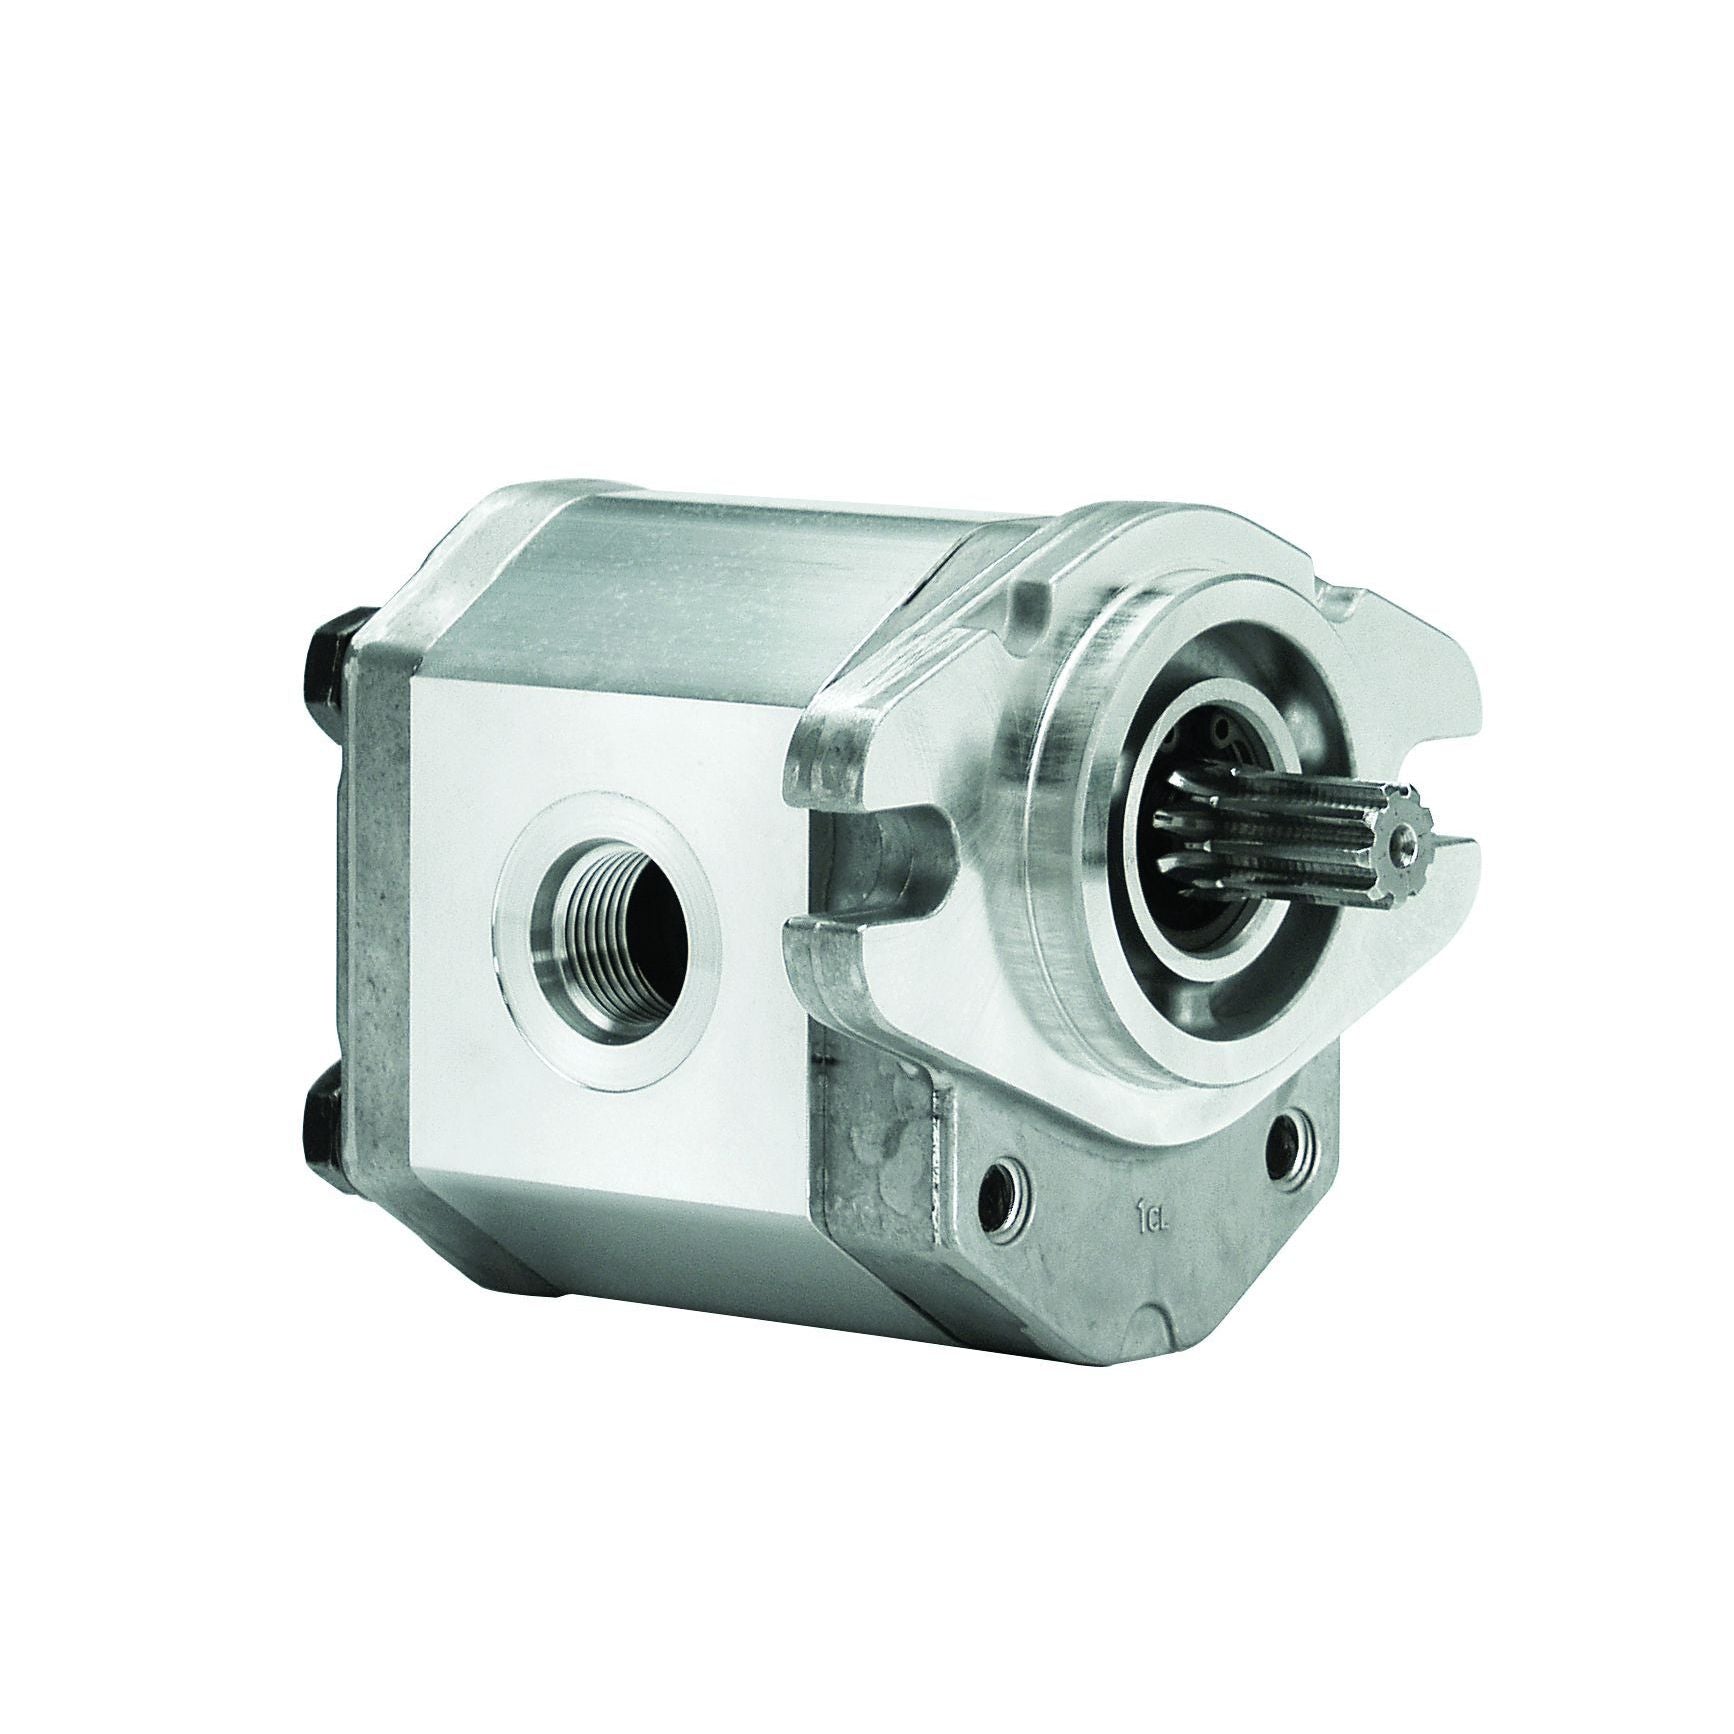 ALP2A-S-6-S1 : Marzocchi Gear Pump, CCW, 4.5cc (0.2745in3), 2.14 GPM, 3625psi, 4000 RPM, #12 SAE (3/4") In, #10 SAE (5/8") Out, Splined Shaft 9T 16/32DP, SAE A 2-Bolt Mount